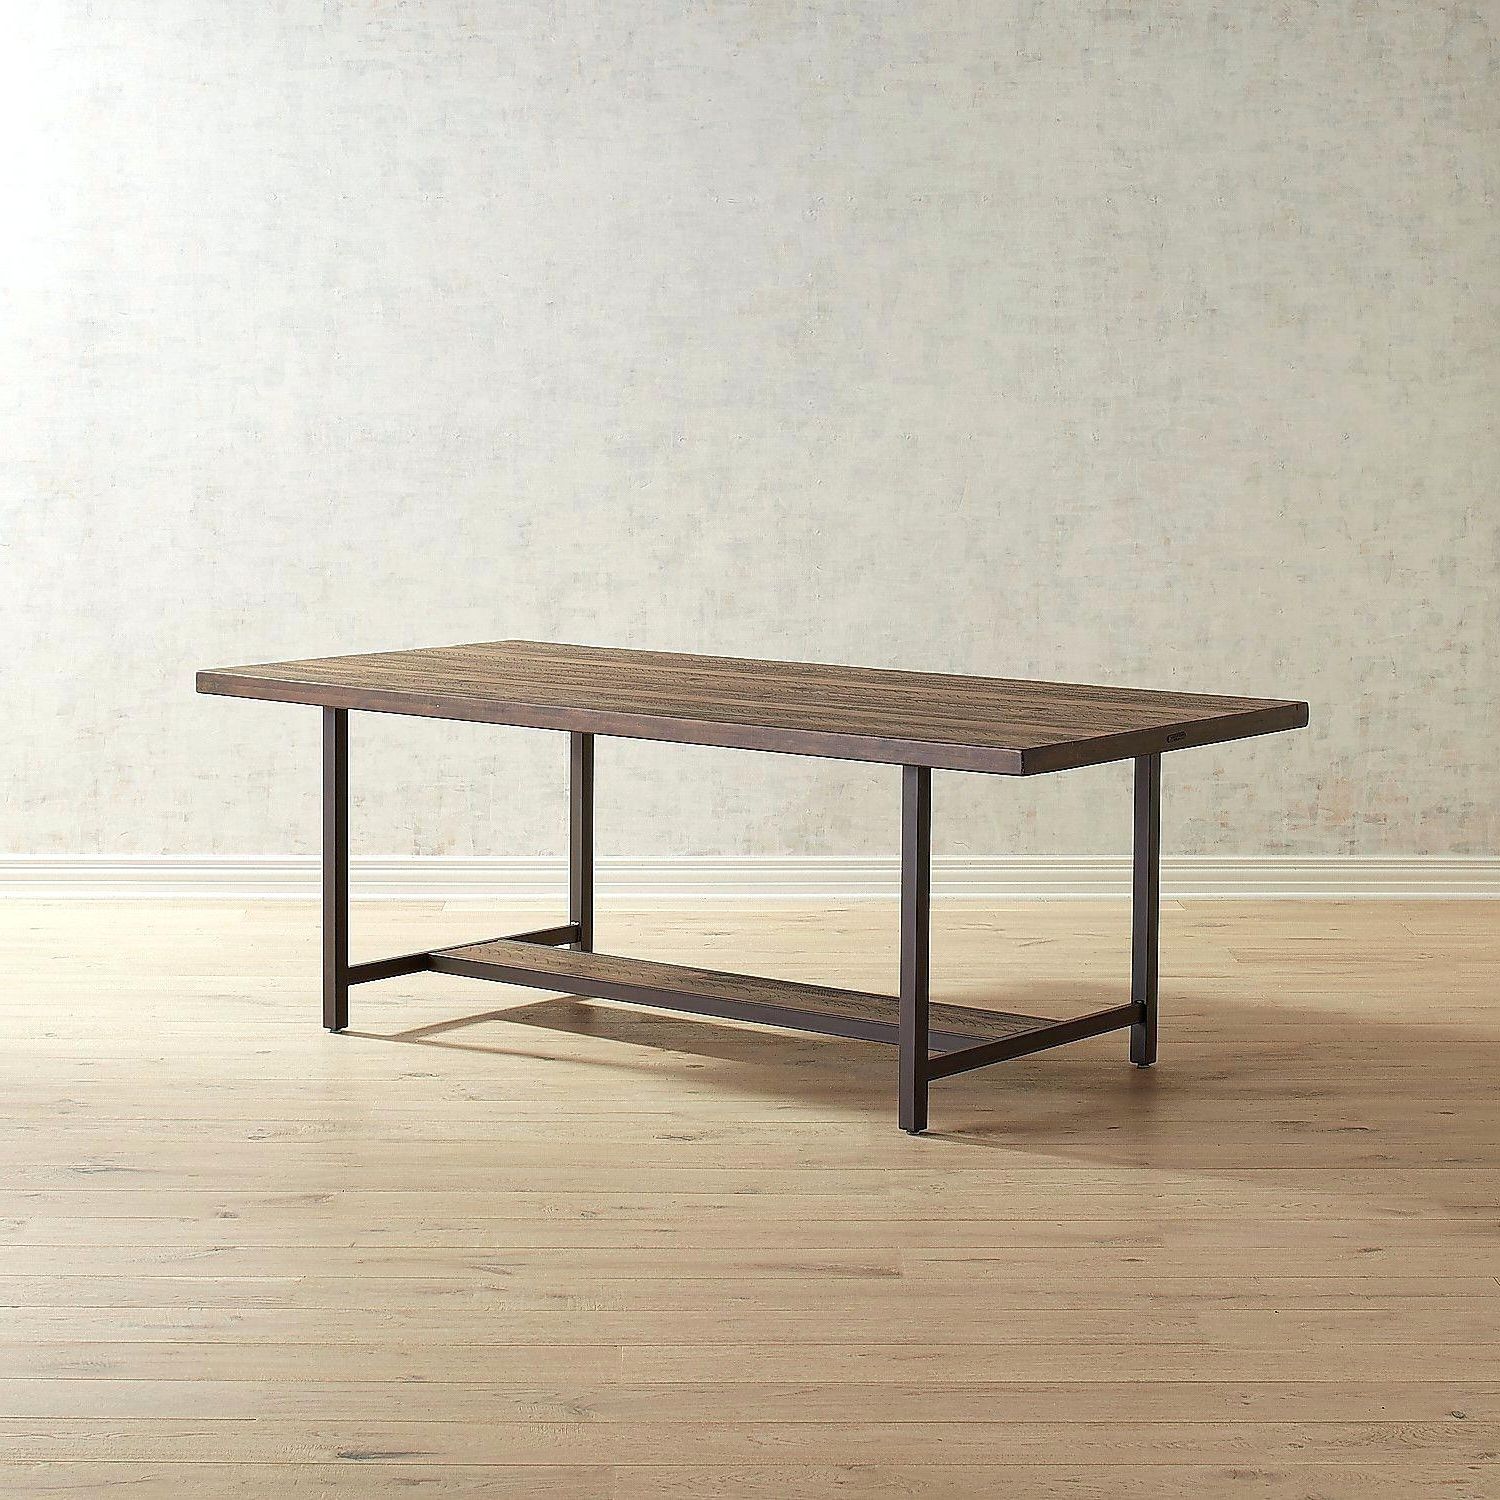 Most Popular Magnolia Home Shop Floor Dining Tables With Iron Trestle Inside Magnolia Home Dining Table Industrial – Battenhall (View 20 of 25)